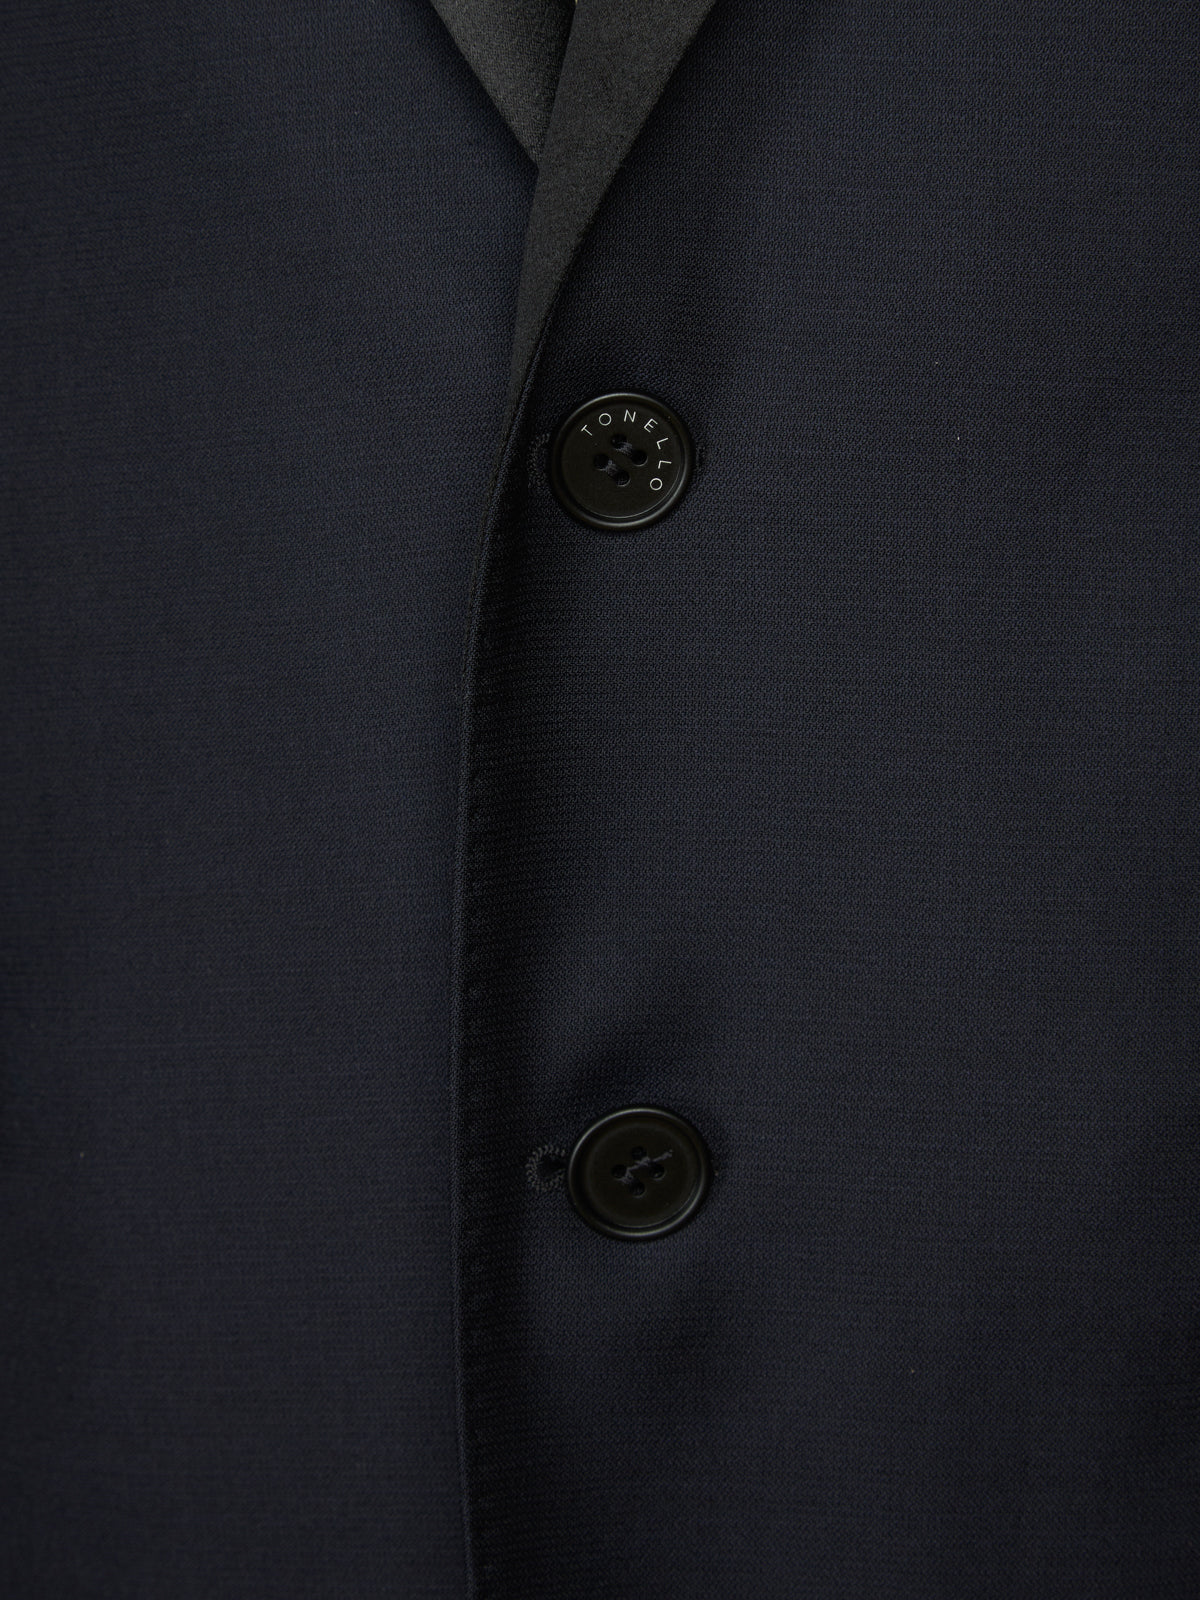 Slim fit iconic smoking suit in blue faille wool